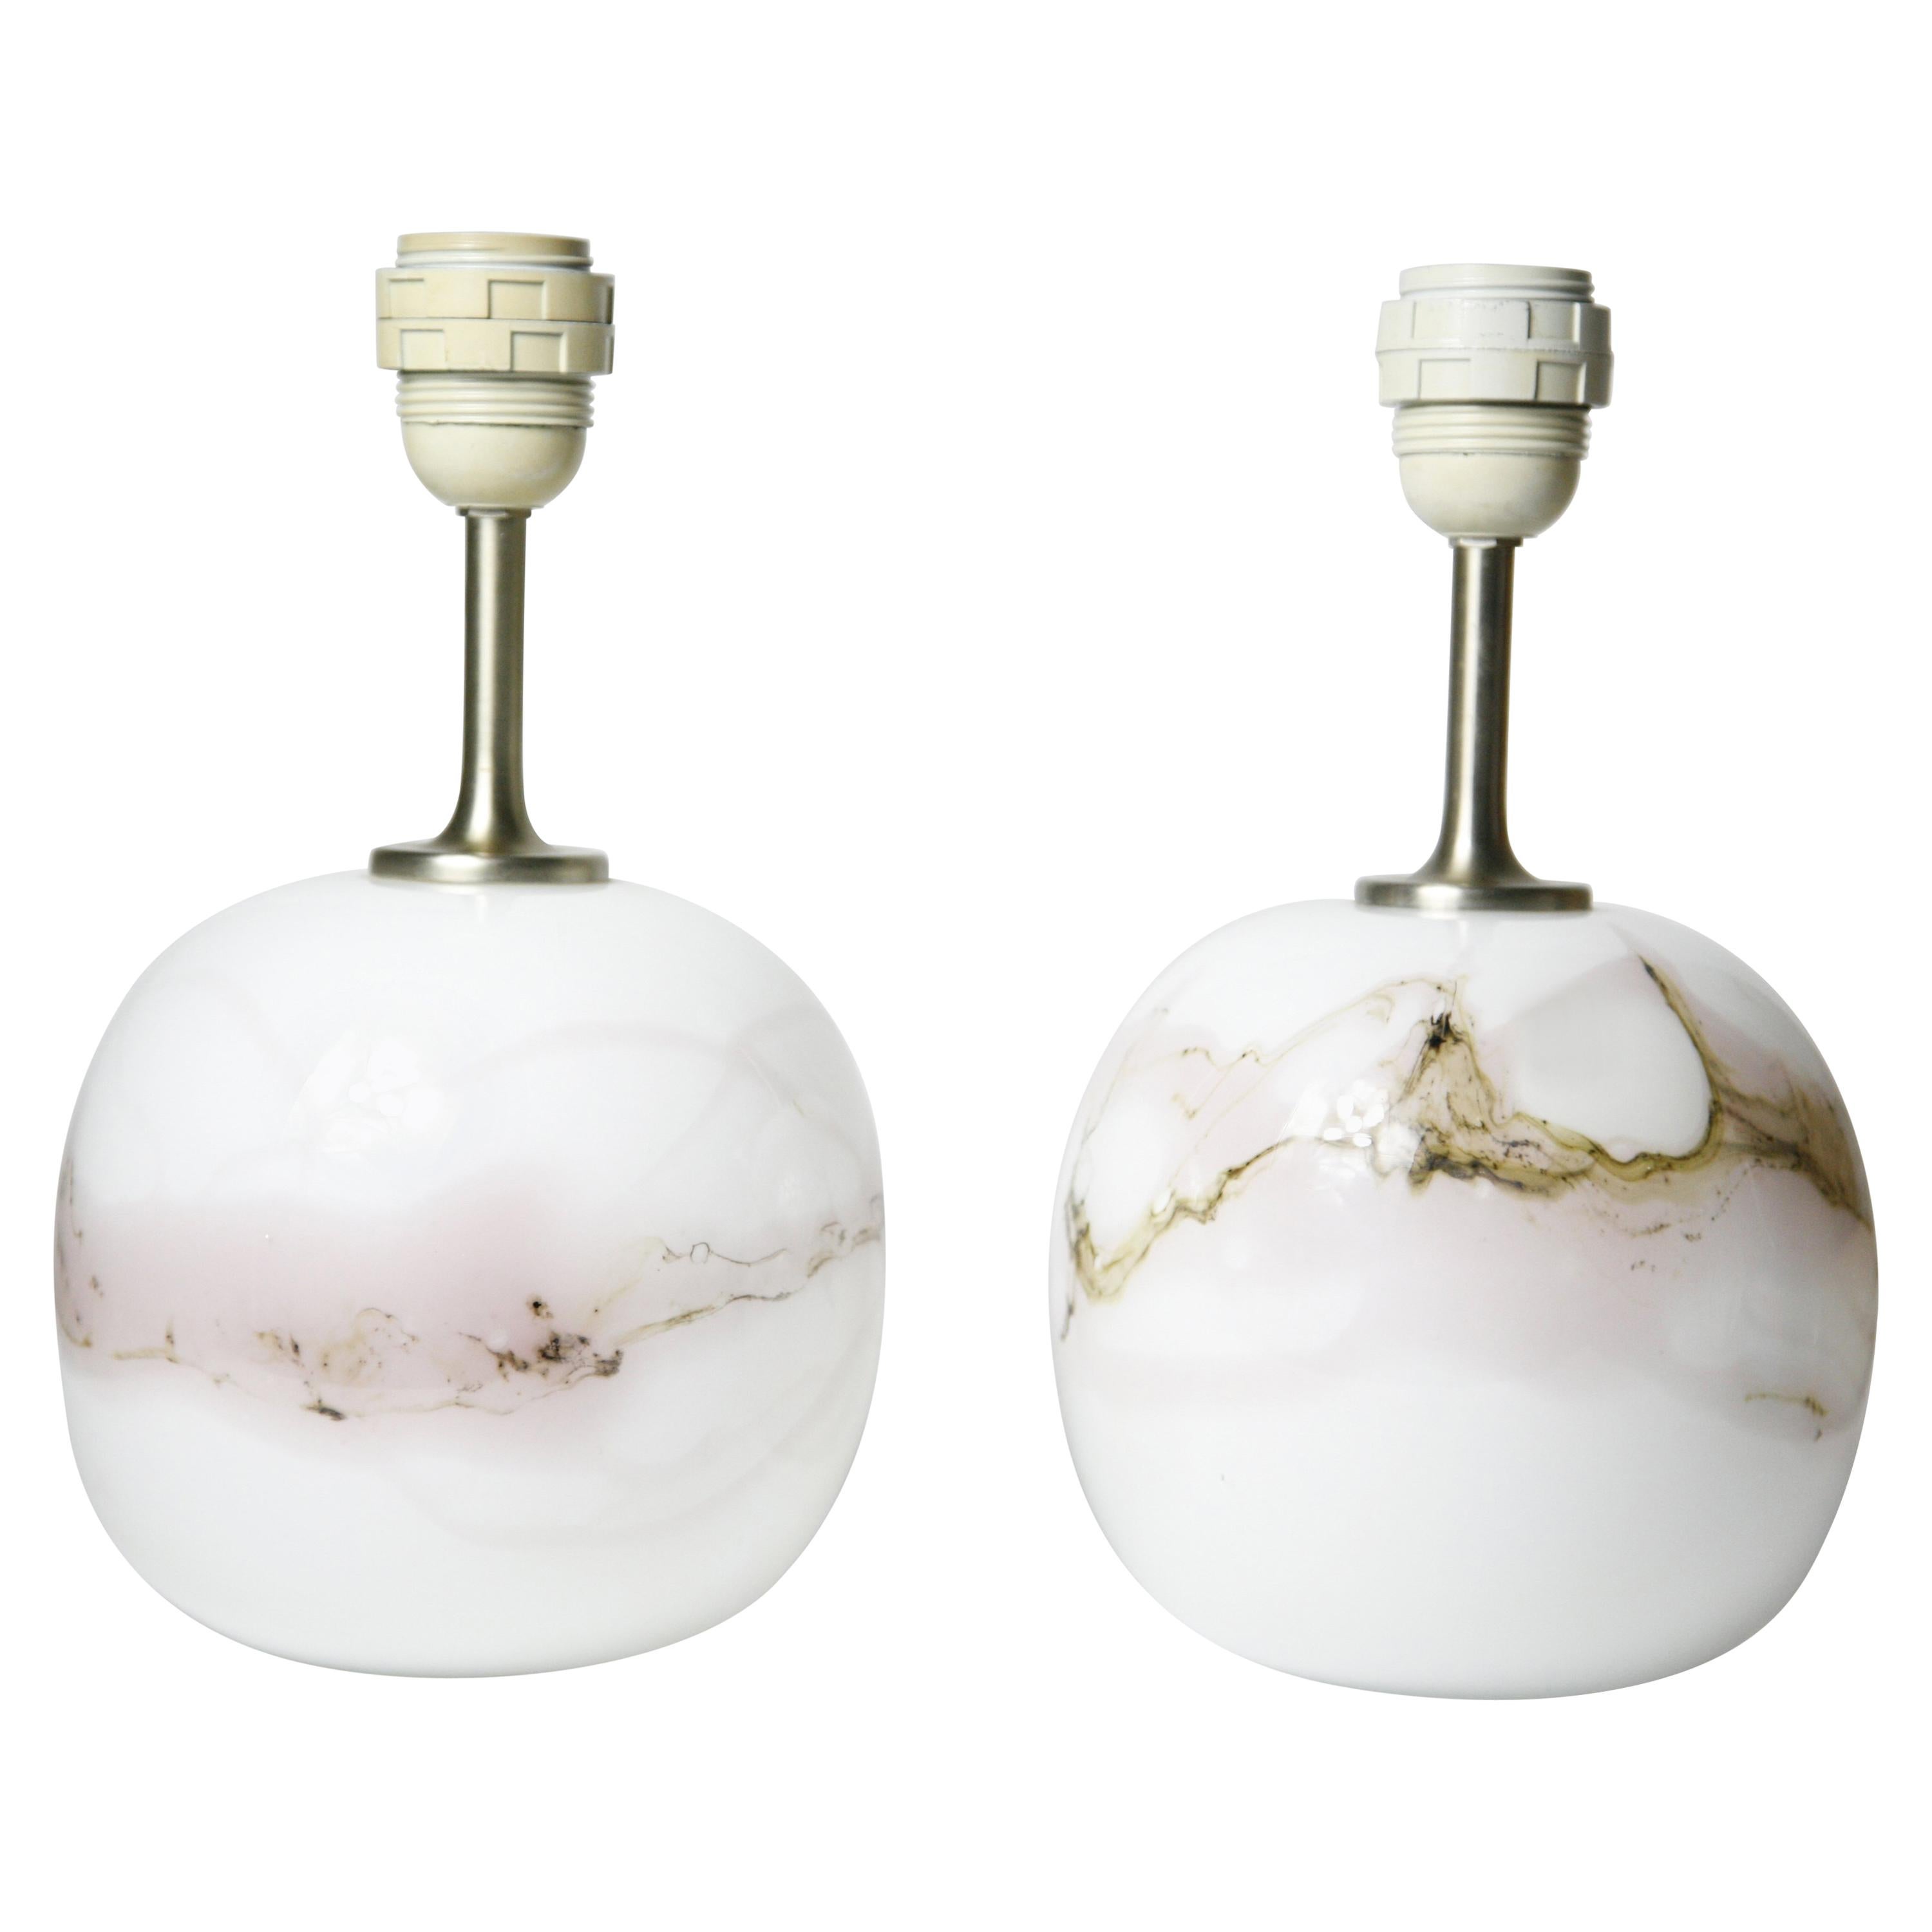 Hand-Crafted Two Holmegaard Lamps Sakura Design Michael Bang, 1984, Denmark For Sale